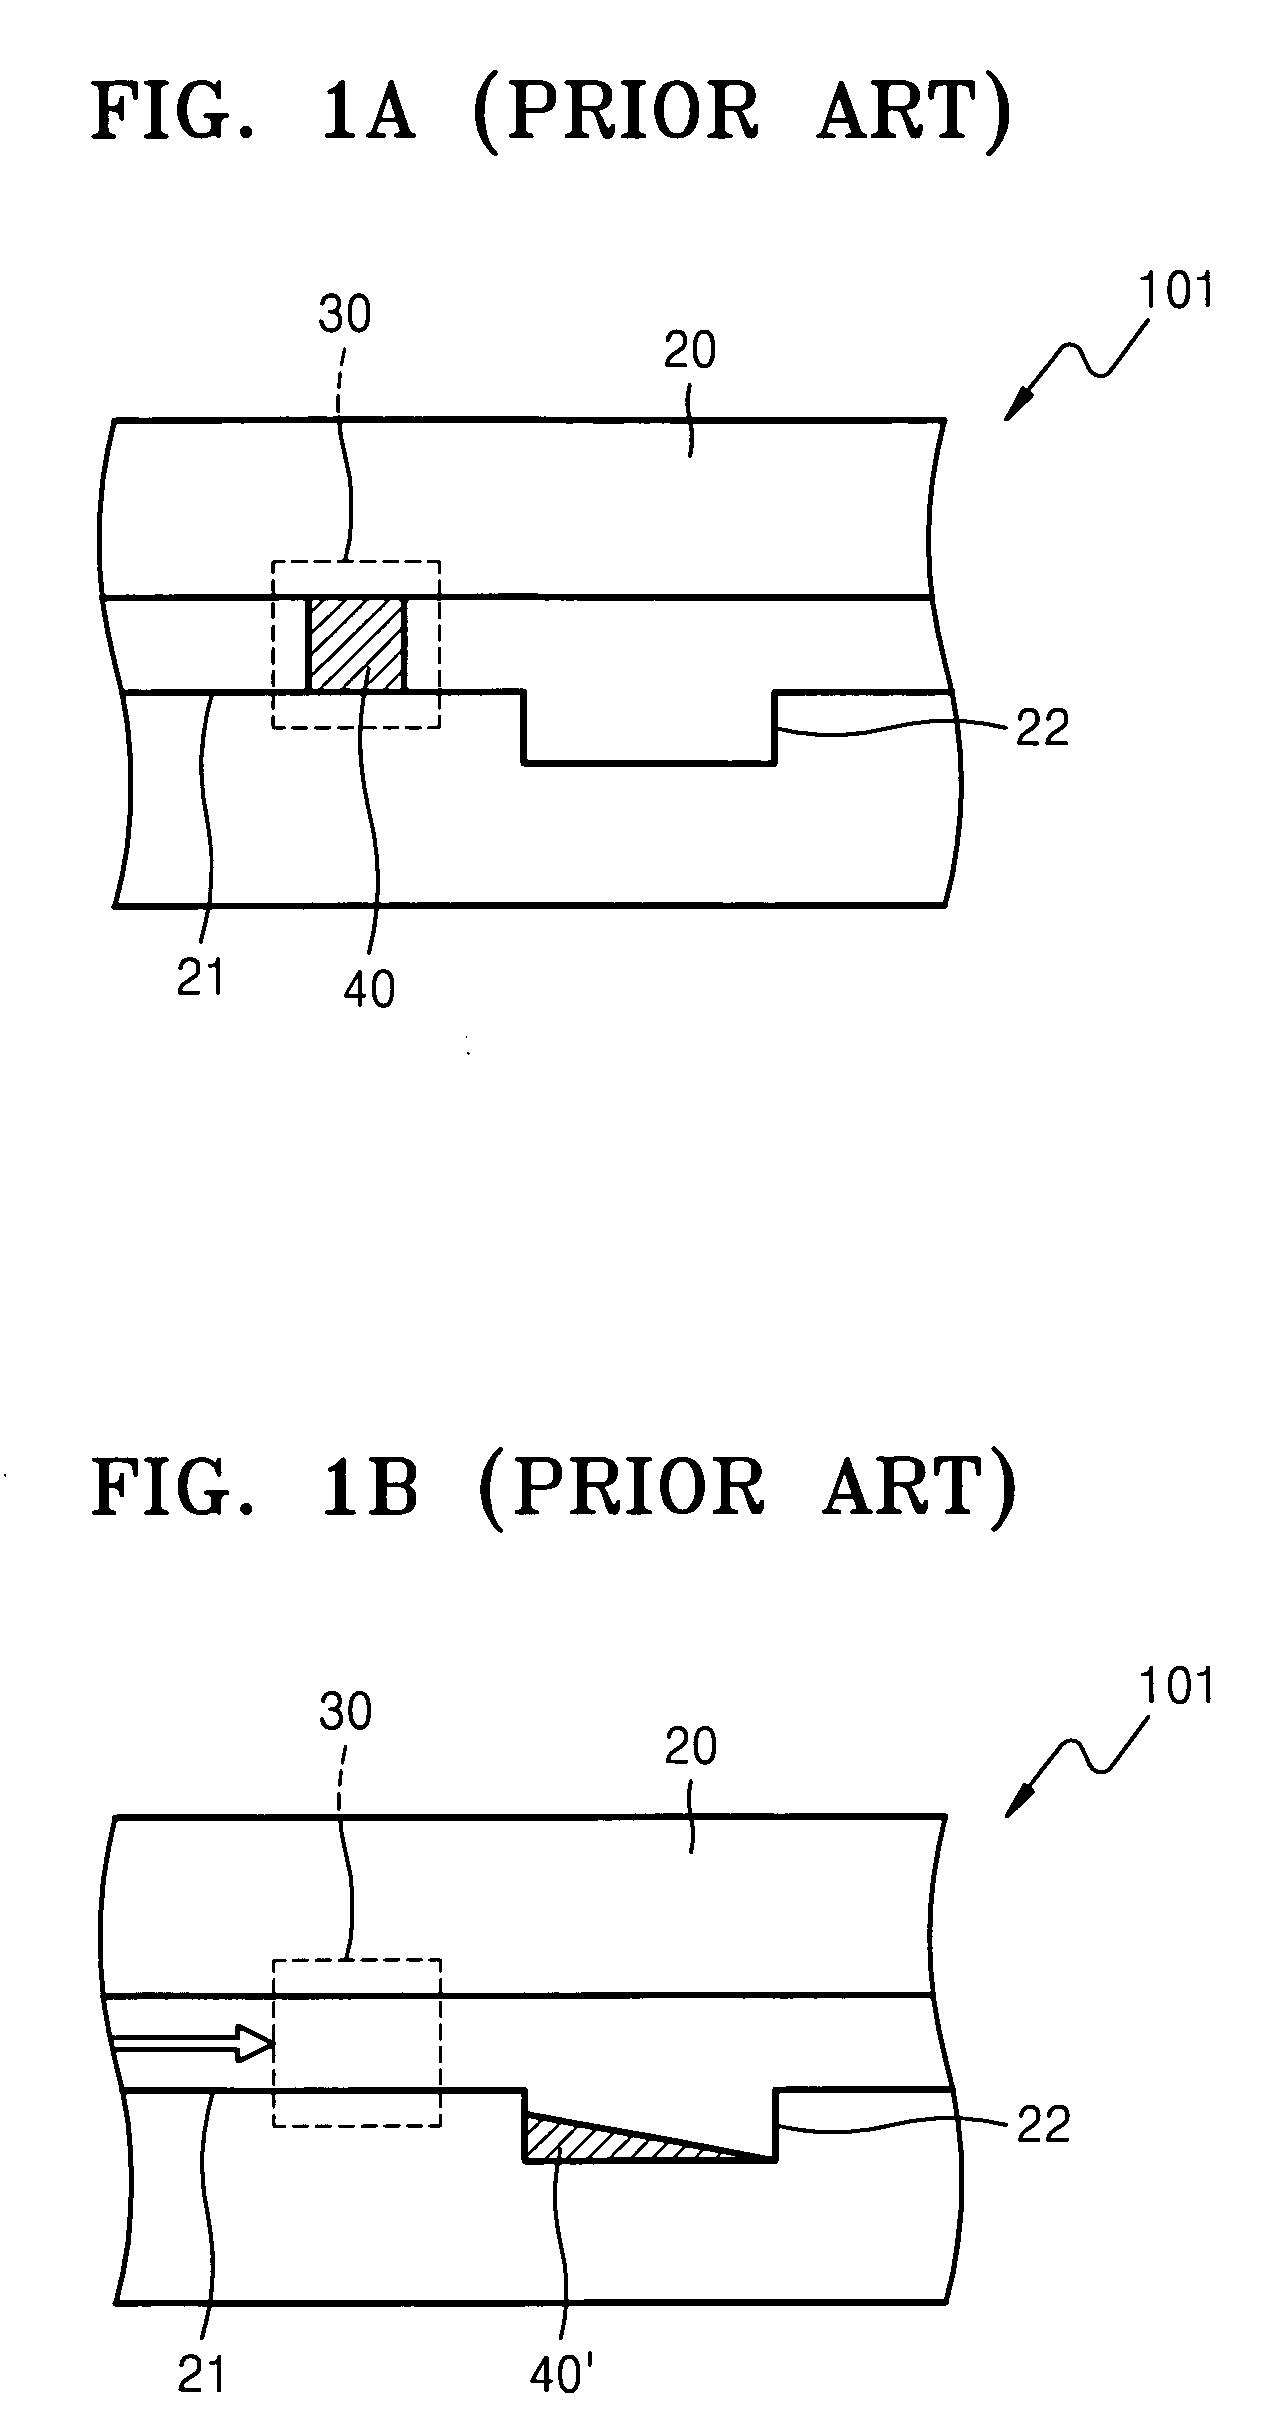 Microvalve having magnetic wax plug and flux control method using magnetic wax